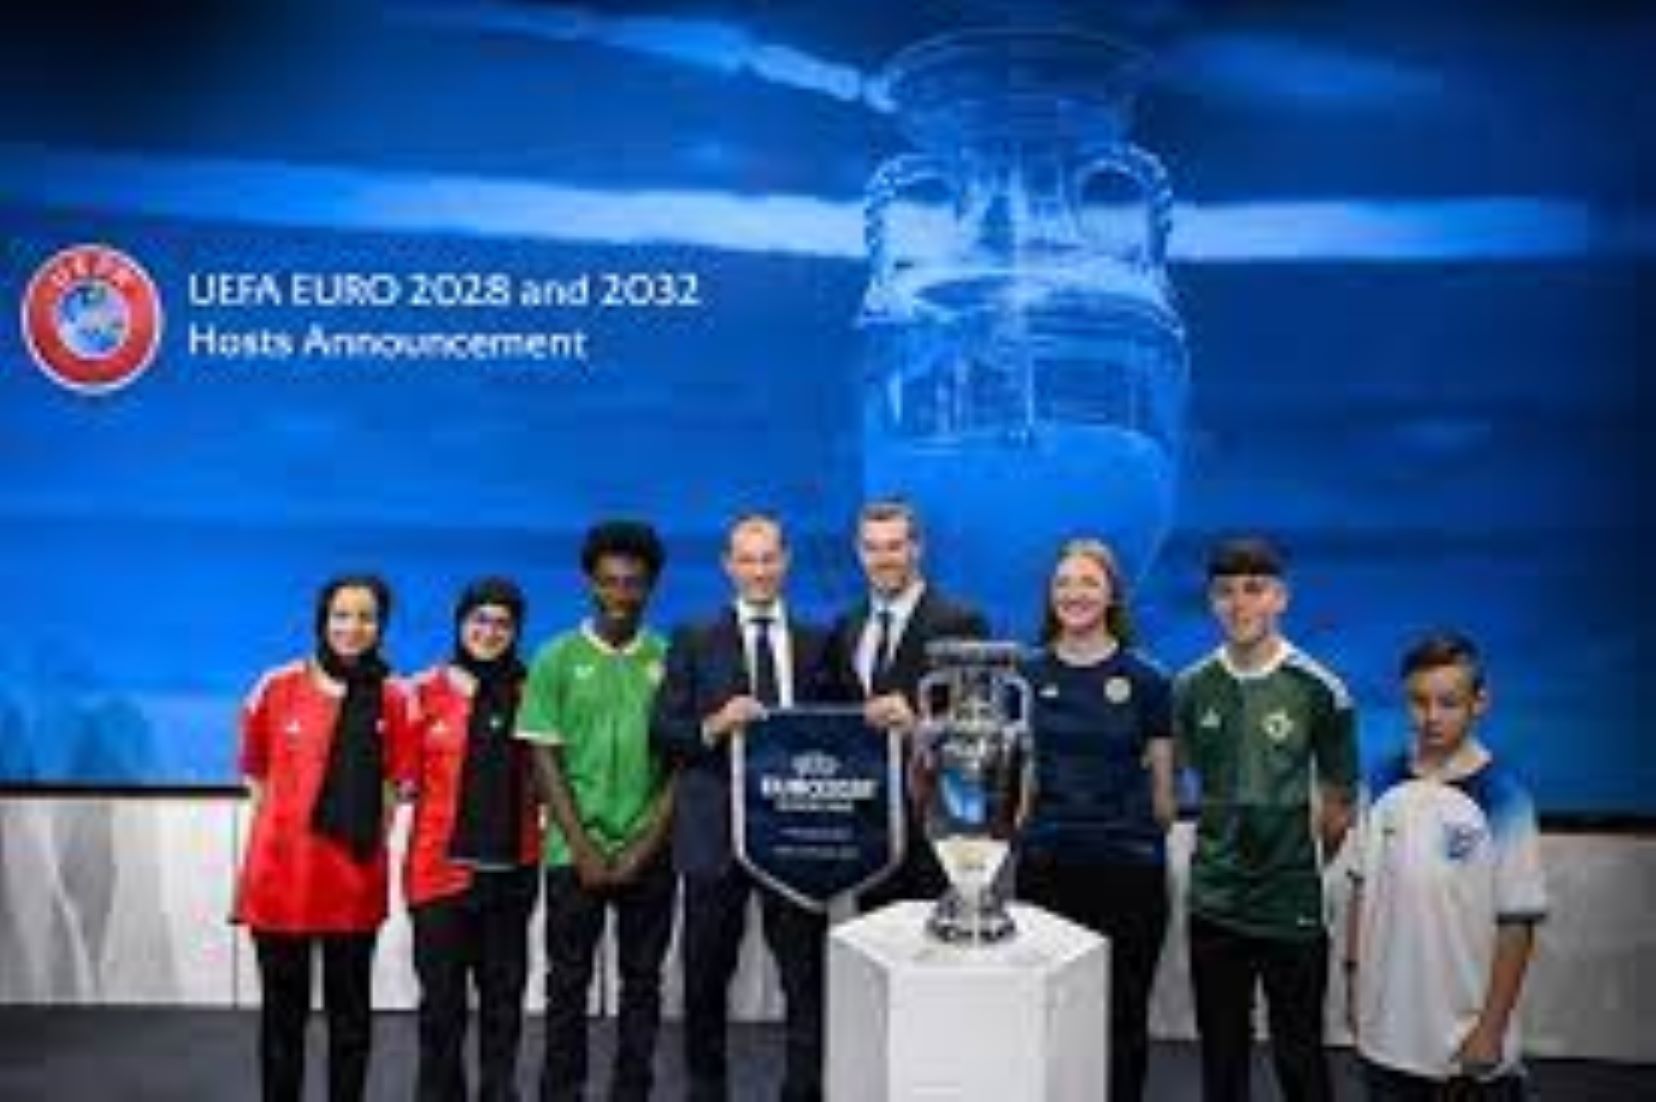 UEFA Announced Euro 2028 And 2032 Hosts